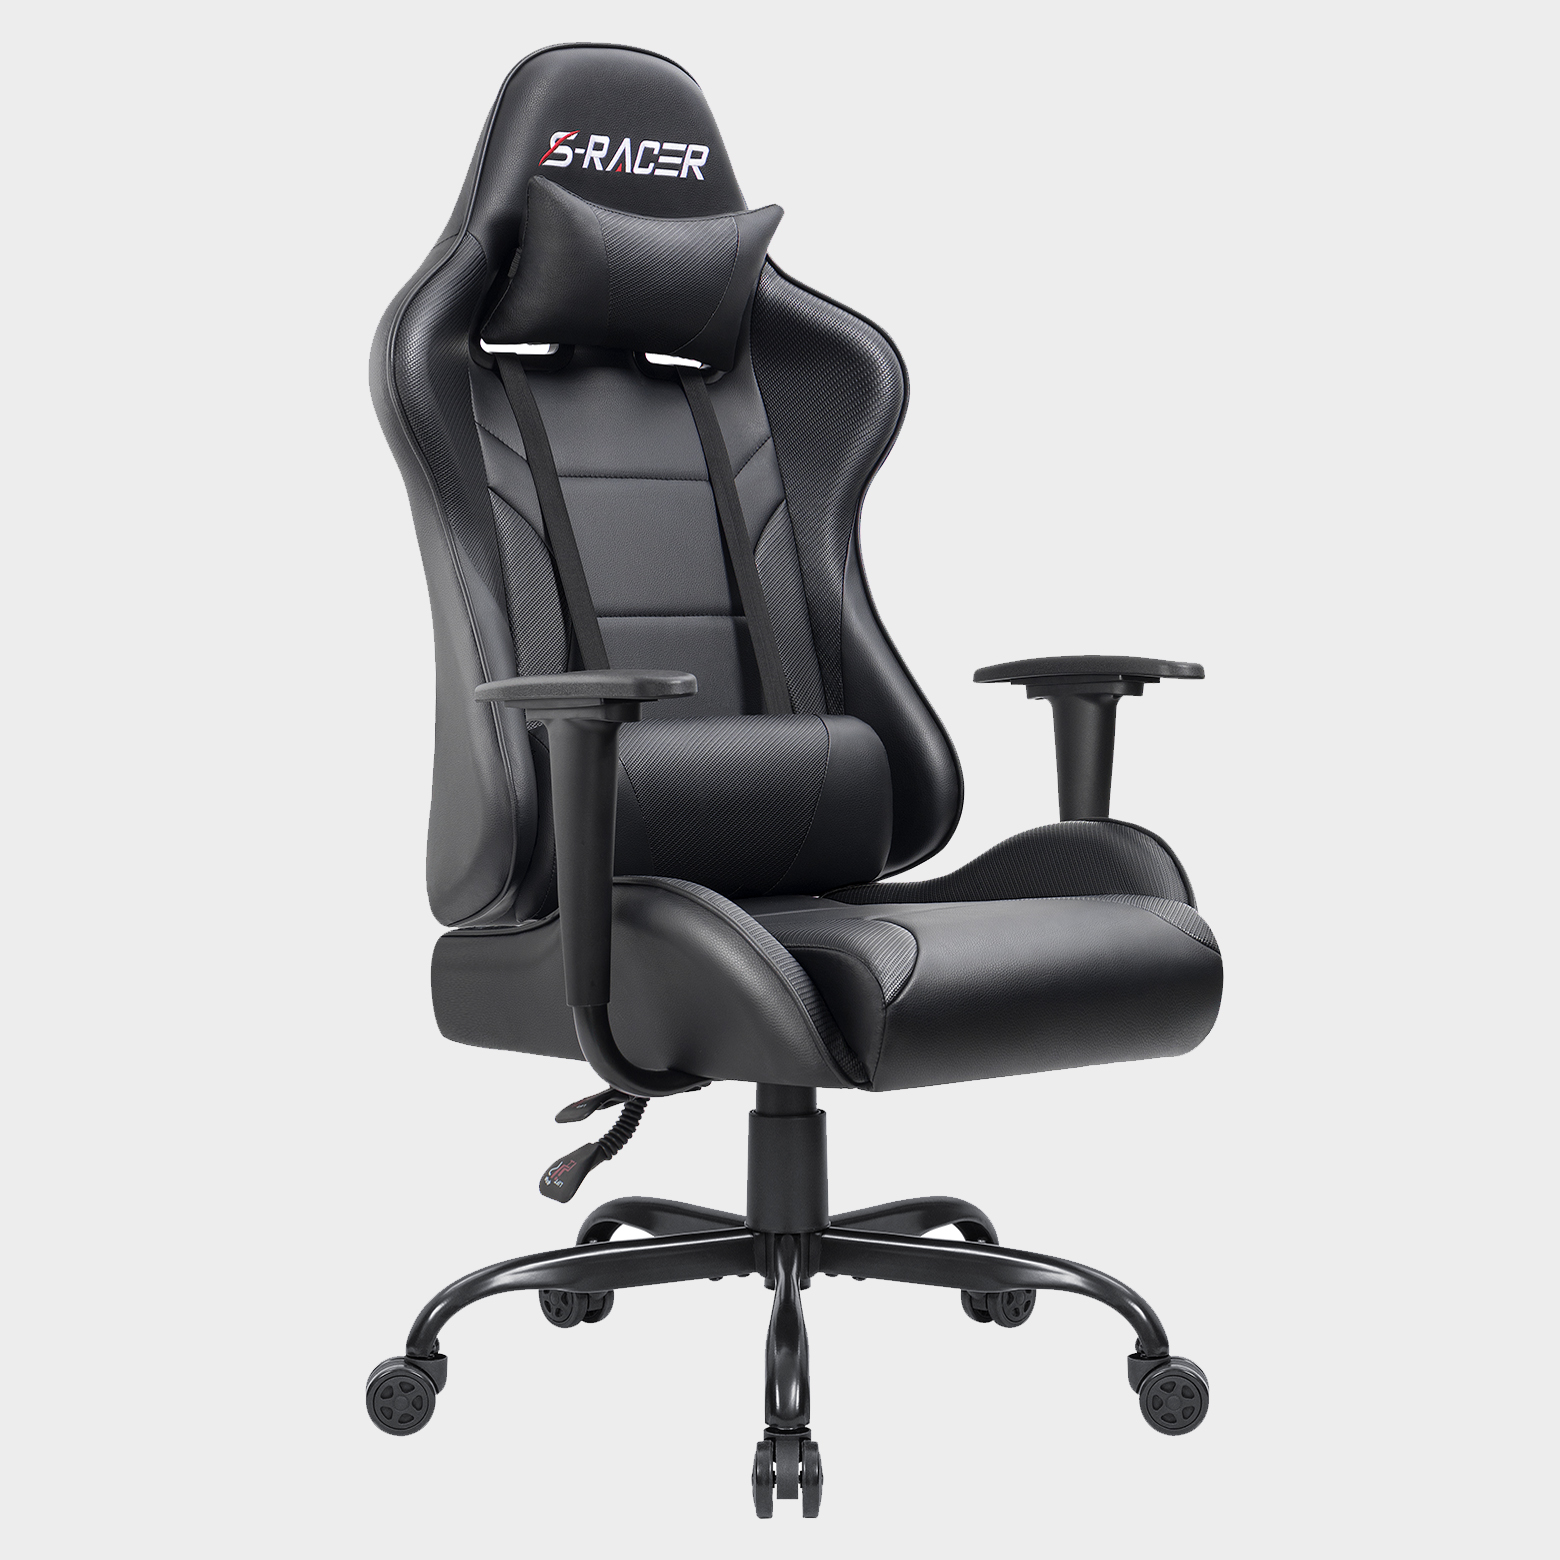 The best cheap gaming chair deals August 2021 Forves PH